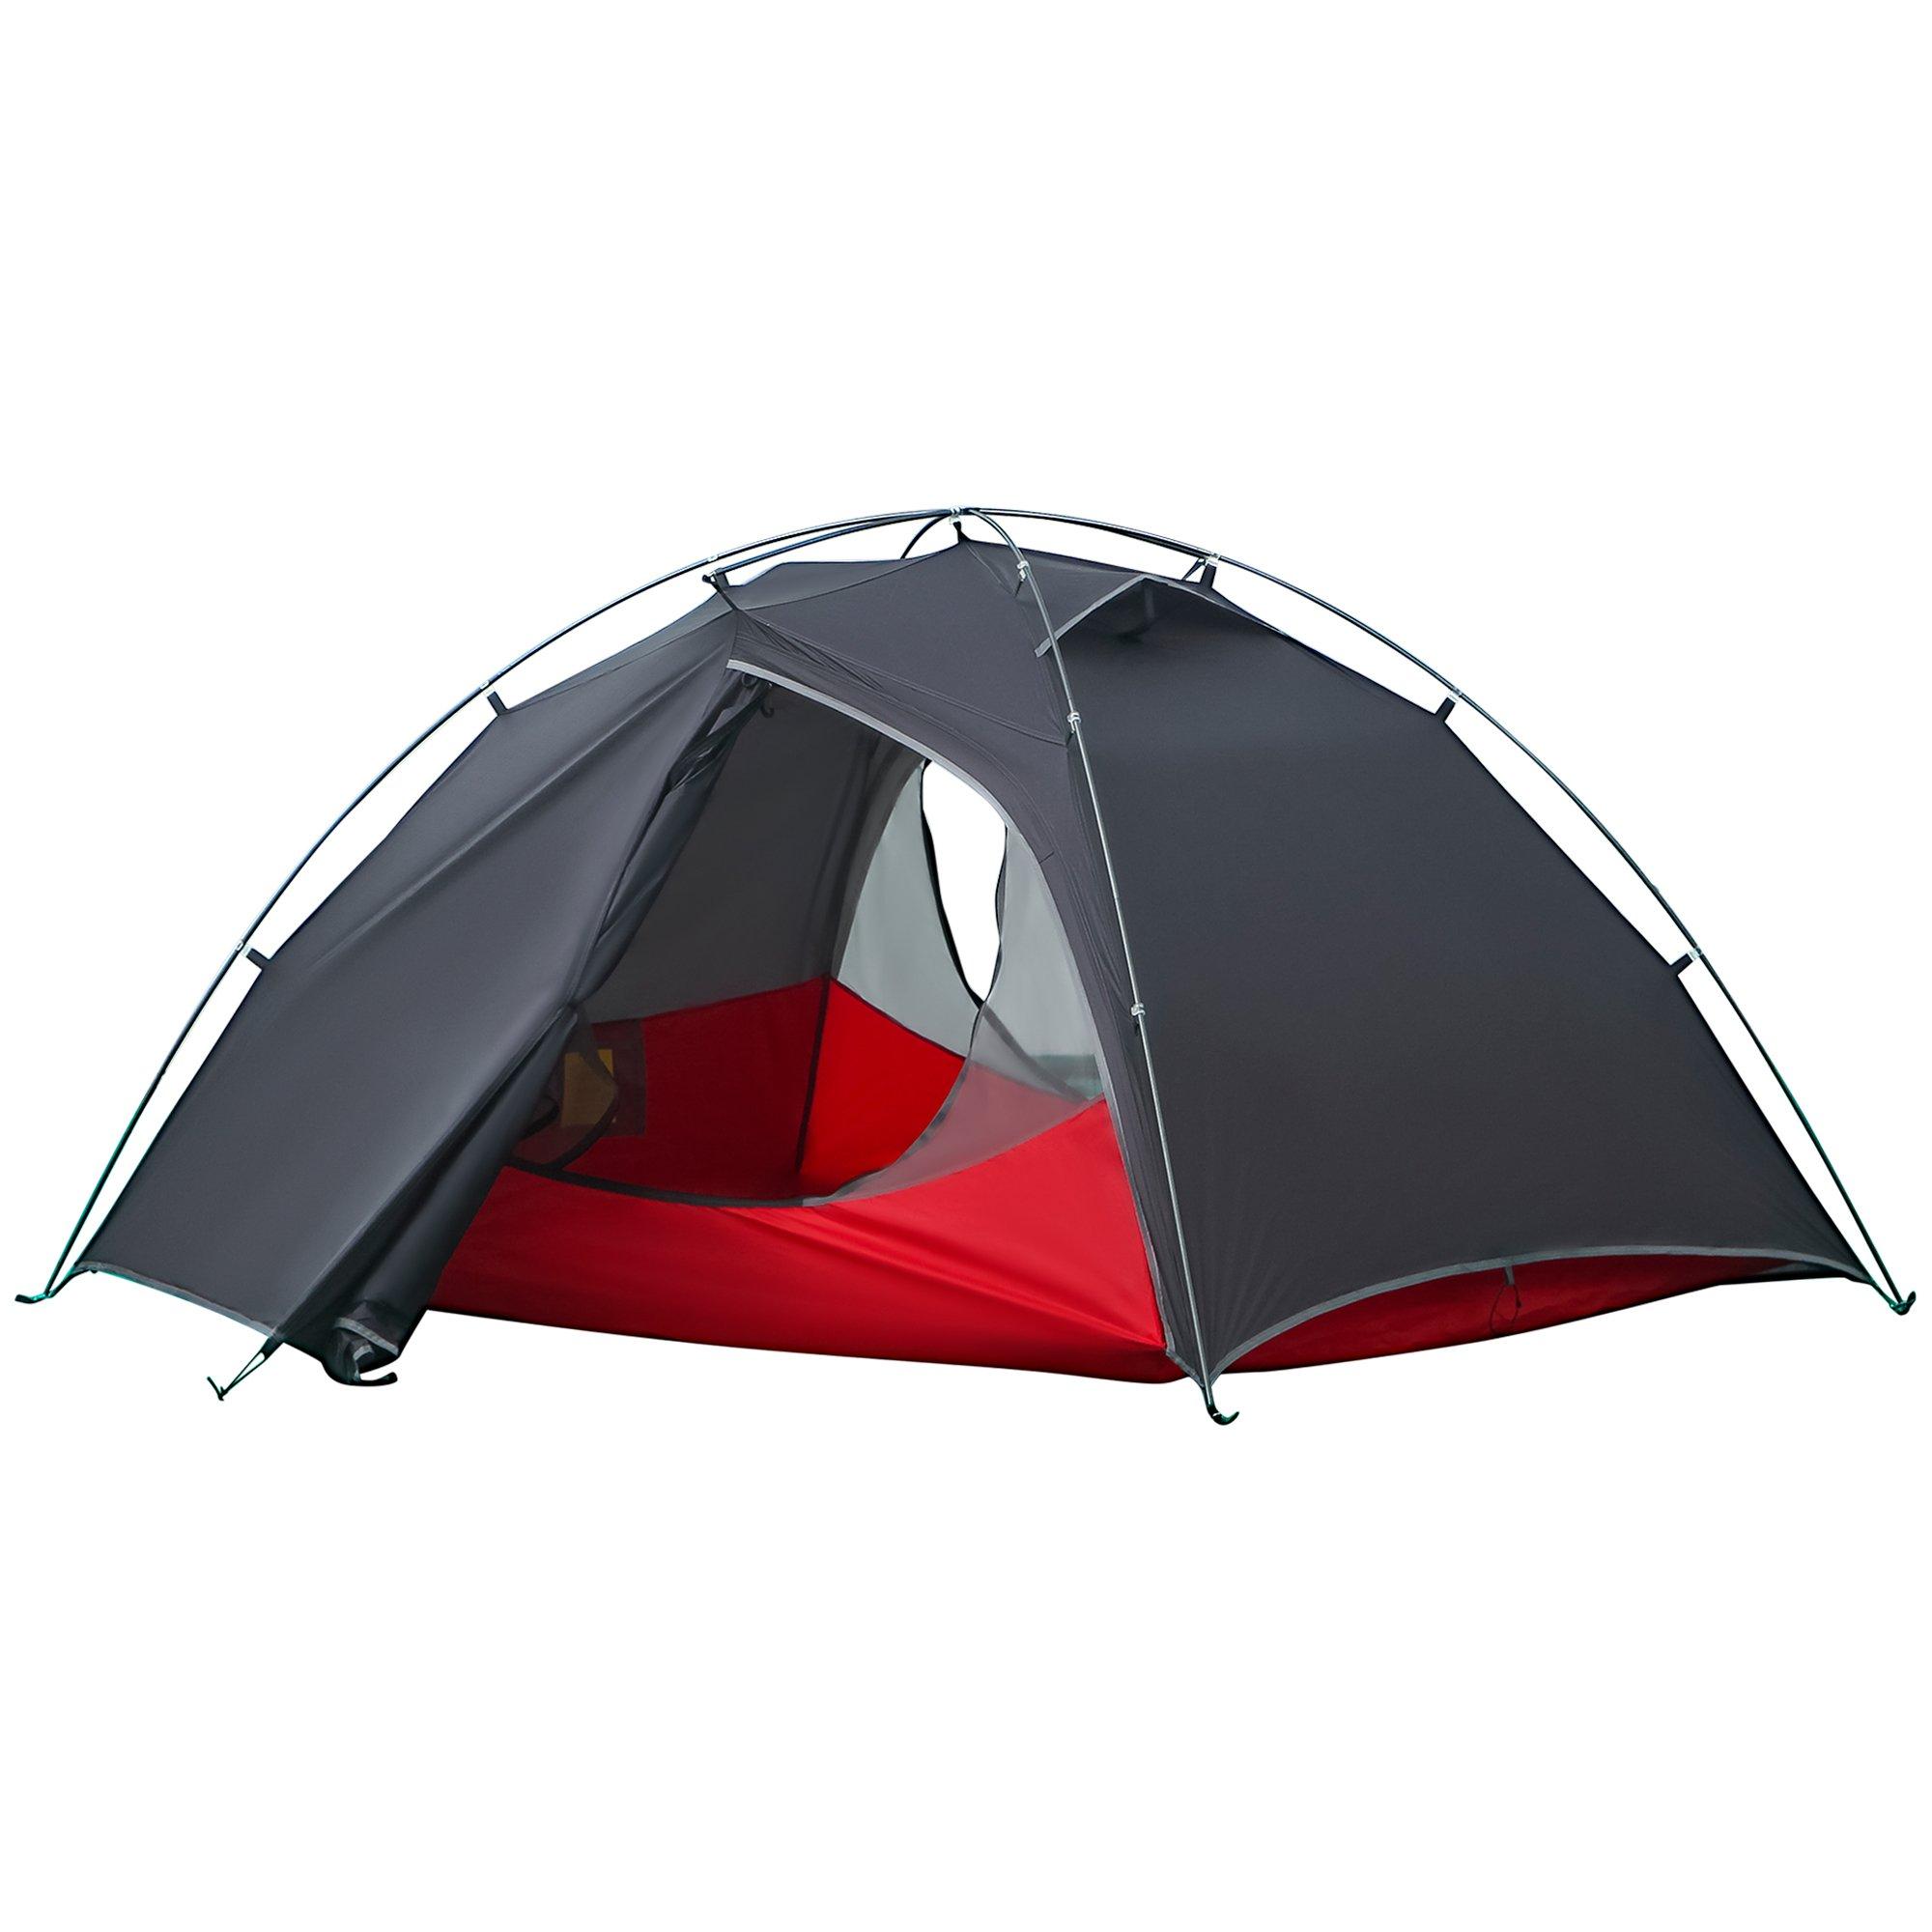 Camping Tent Compact 2 Man Dome Tent for Hiking Garden